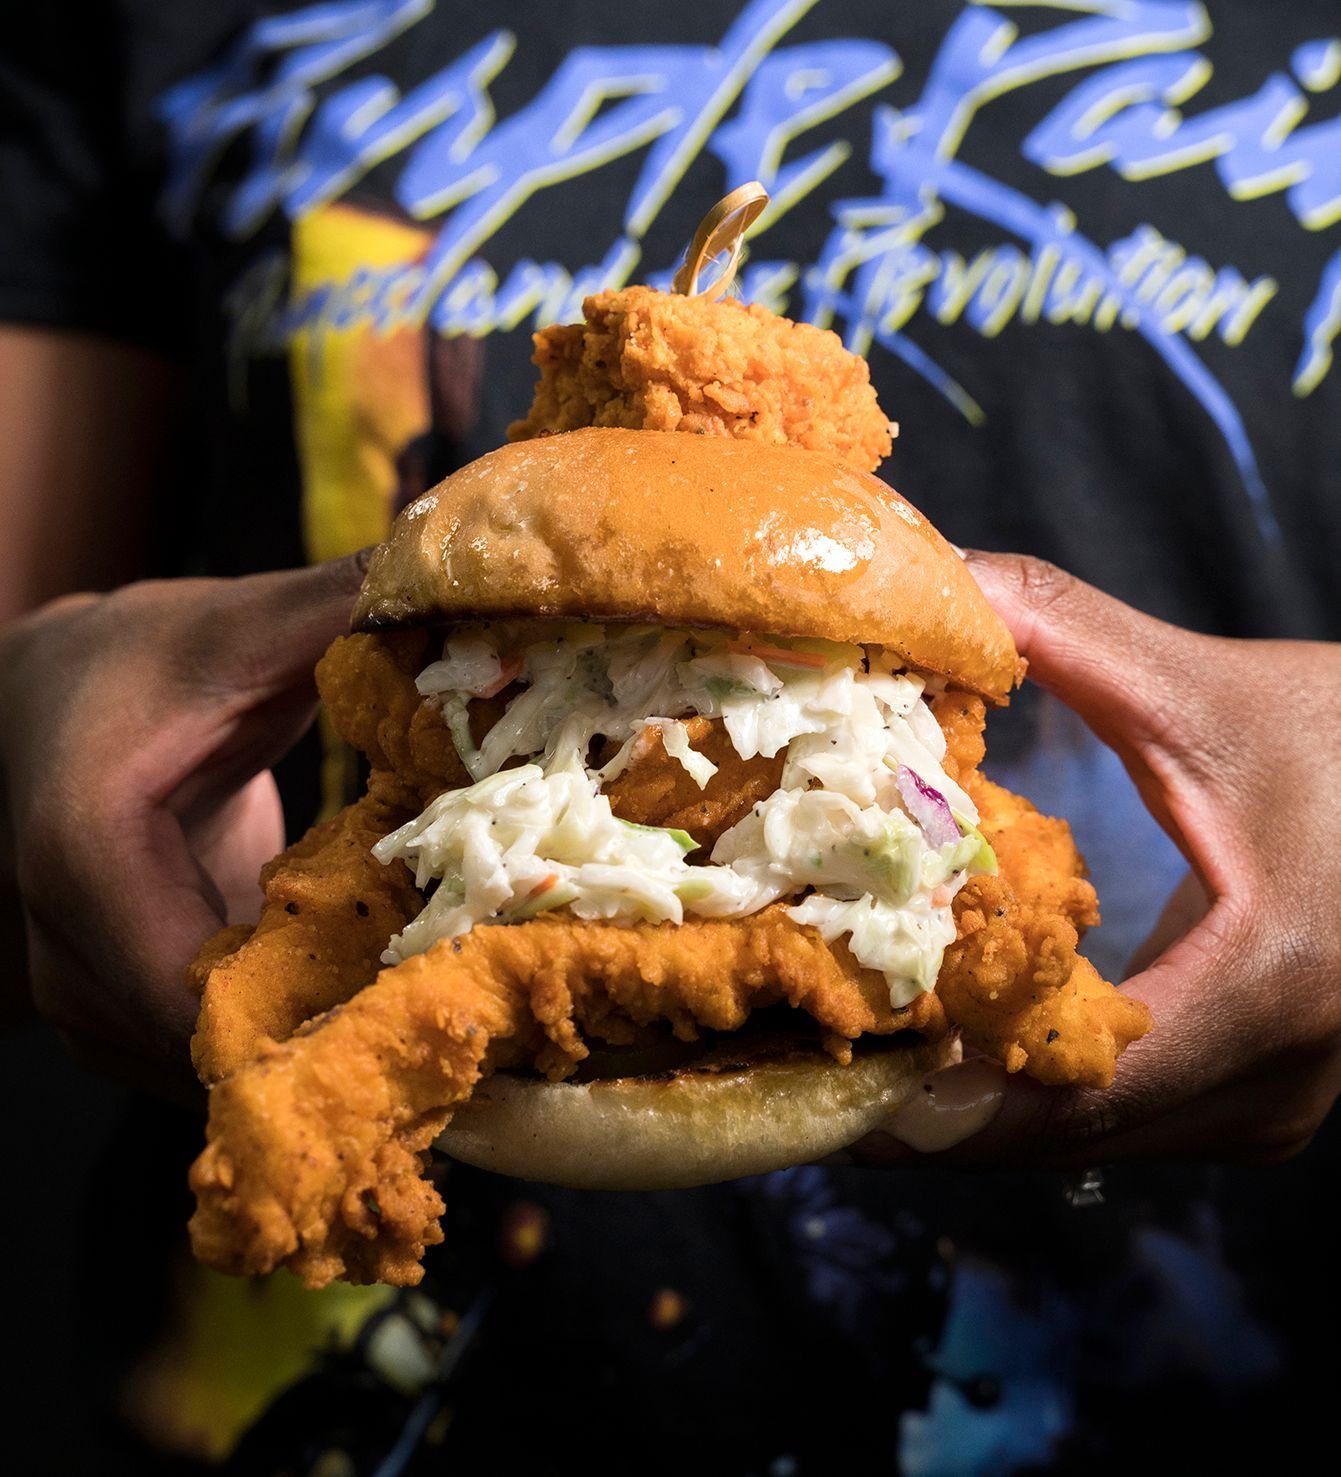 We don't care how long you've been making 'em, how hot the sauce is, or how cute the wrapper is...these fast food chicken sandwiches CAN'T COMPETE with our Just Chicken Sandwich. 

Add the slaw and it's game over...

.

.

.

#JustChicken #TenderLove